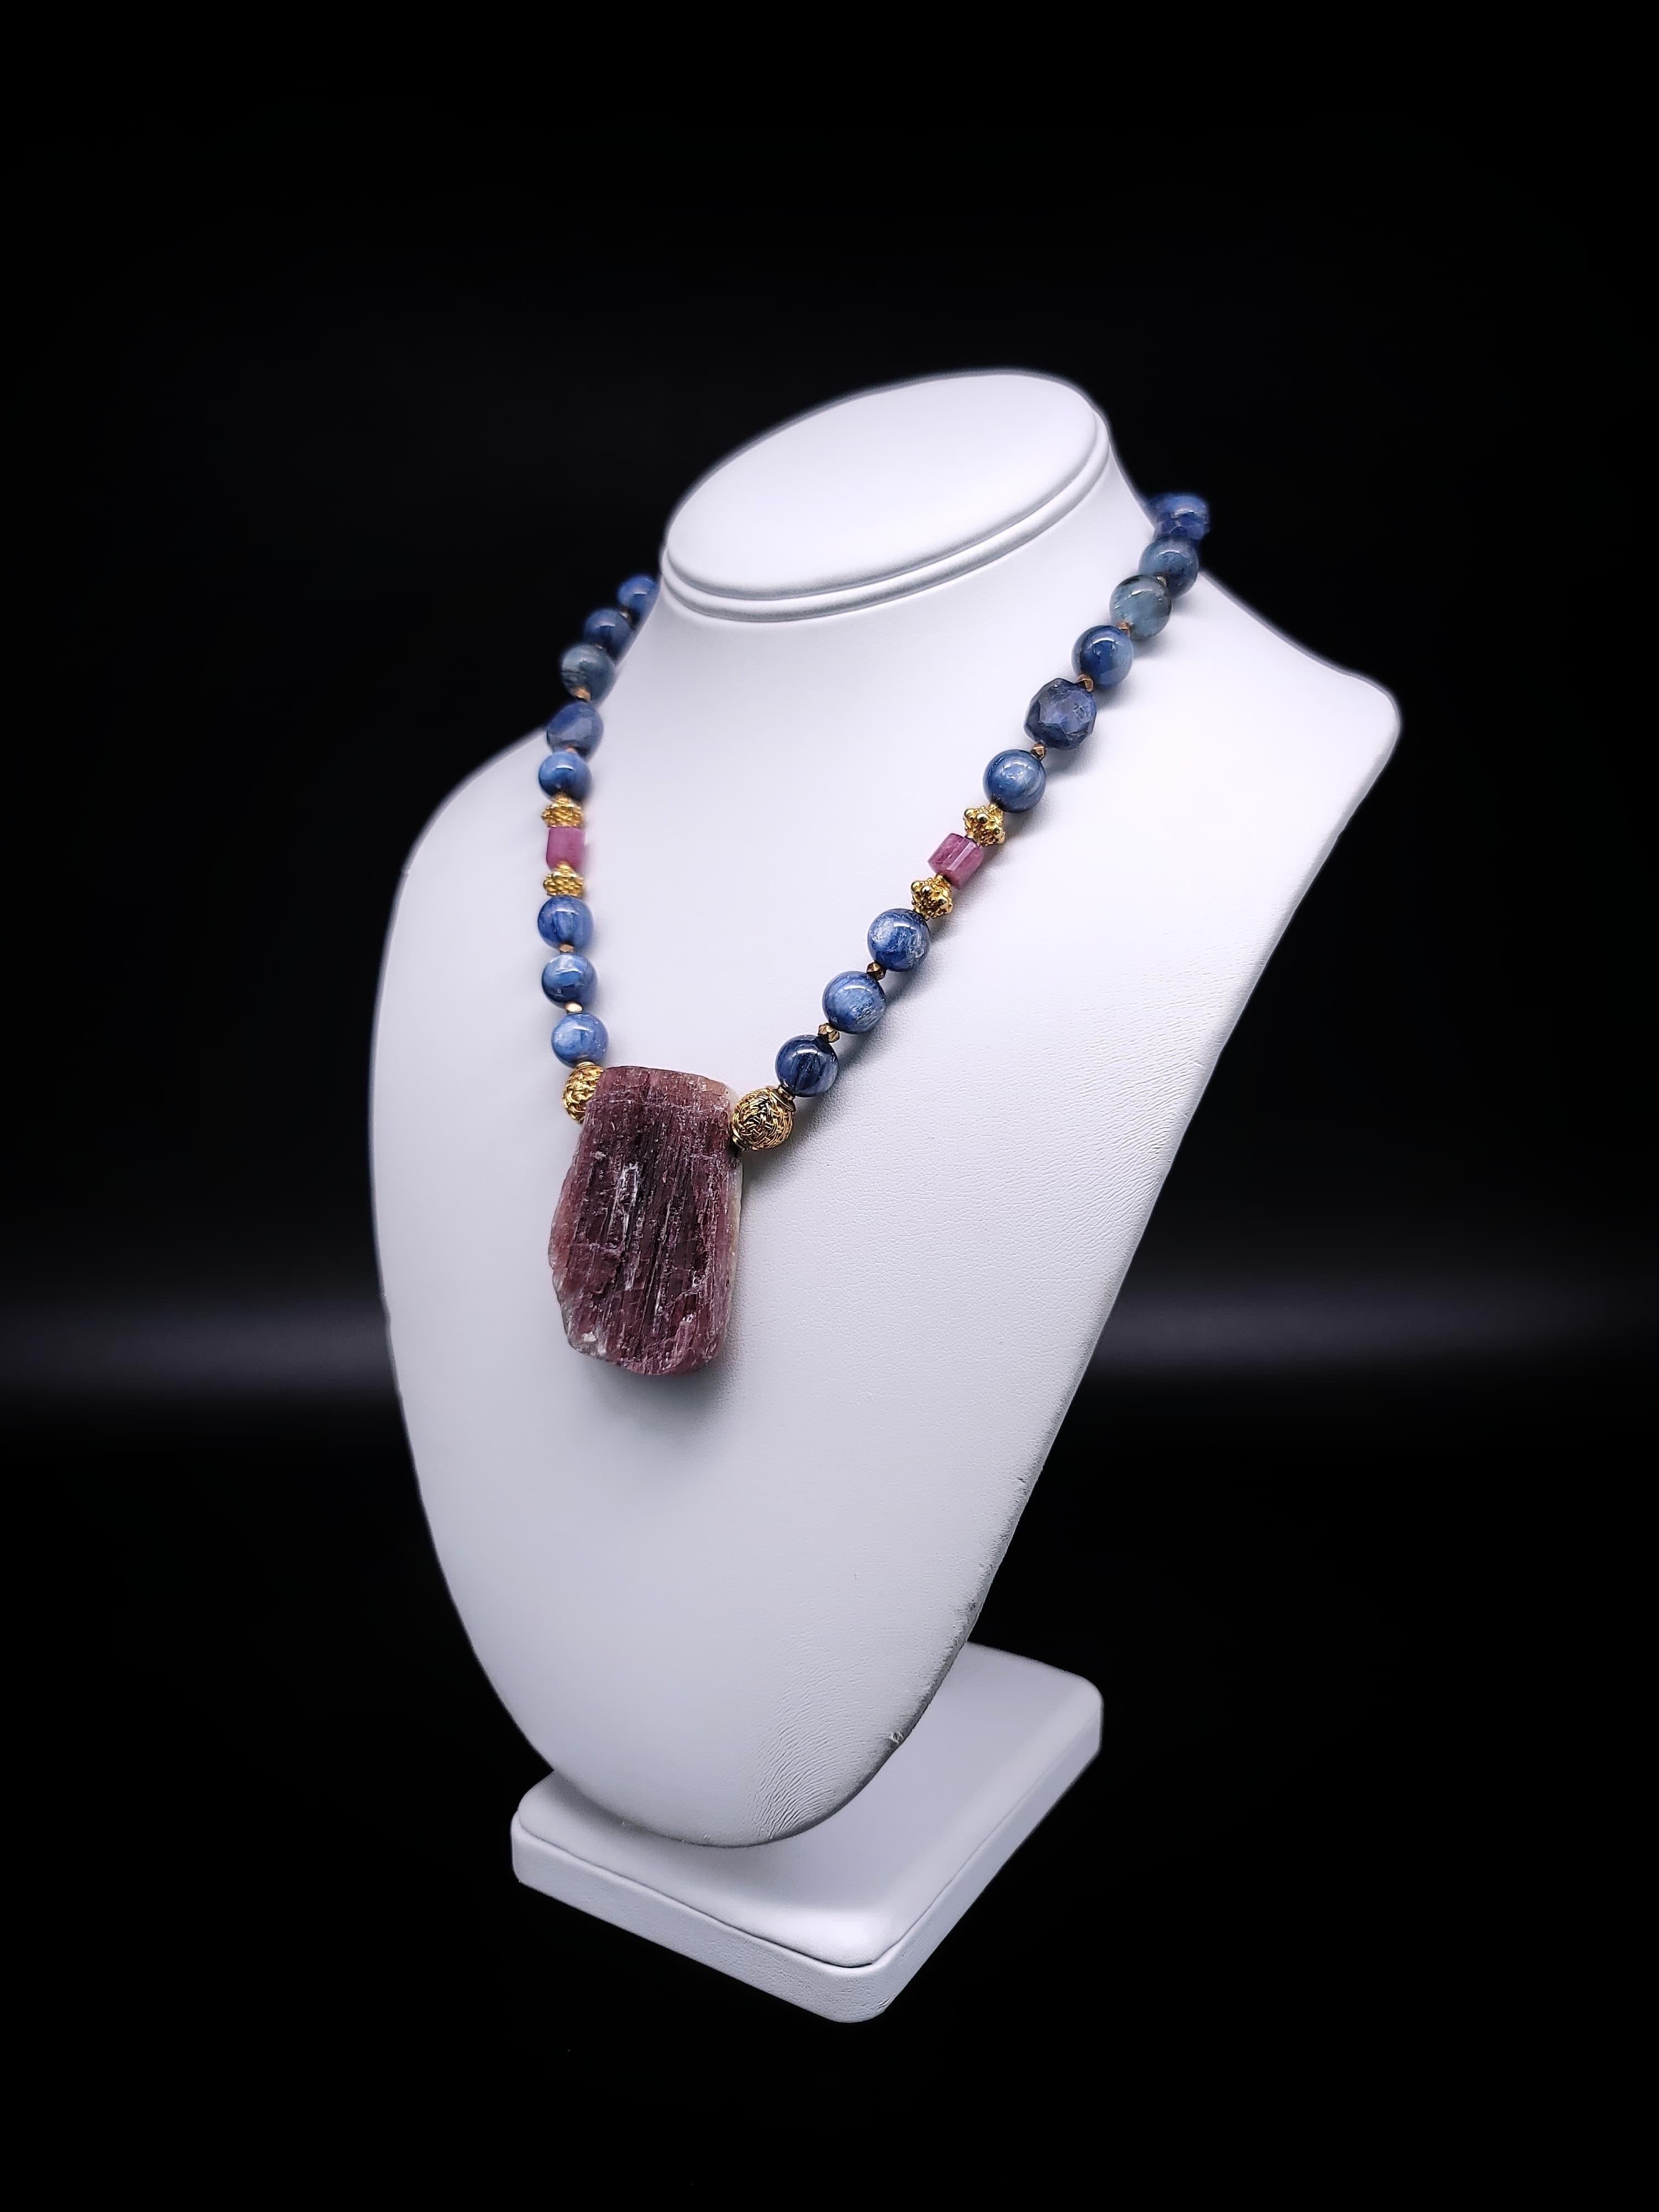 Elevate your jewelry collection with this truly exceptional one-of-a-kind necklace. Rich blue Kyanite and sapphire gemstones, adorned with a delicate touch of Tourmaline, harmoniously come together with the opulence of vermeil (22-karat gold over